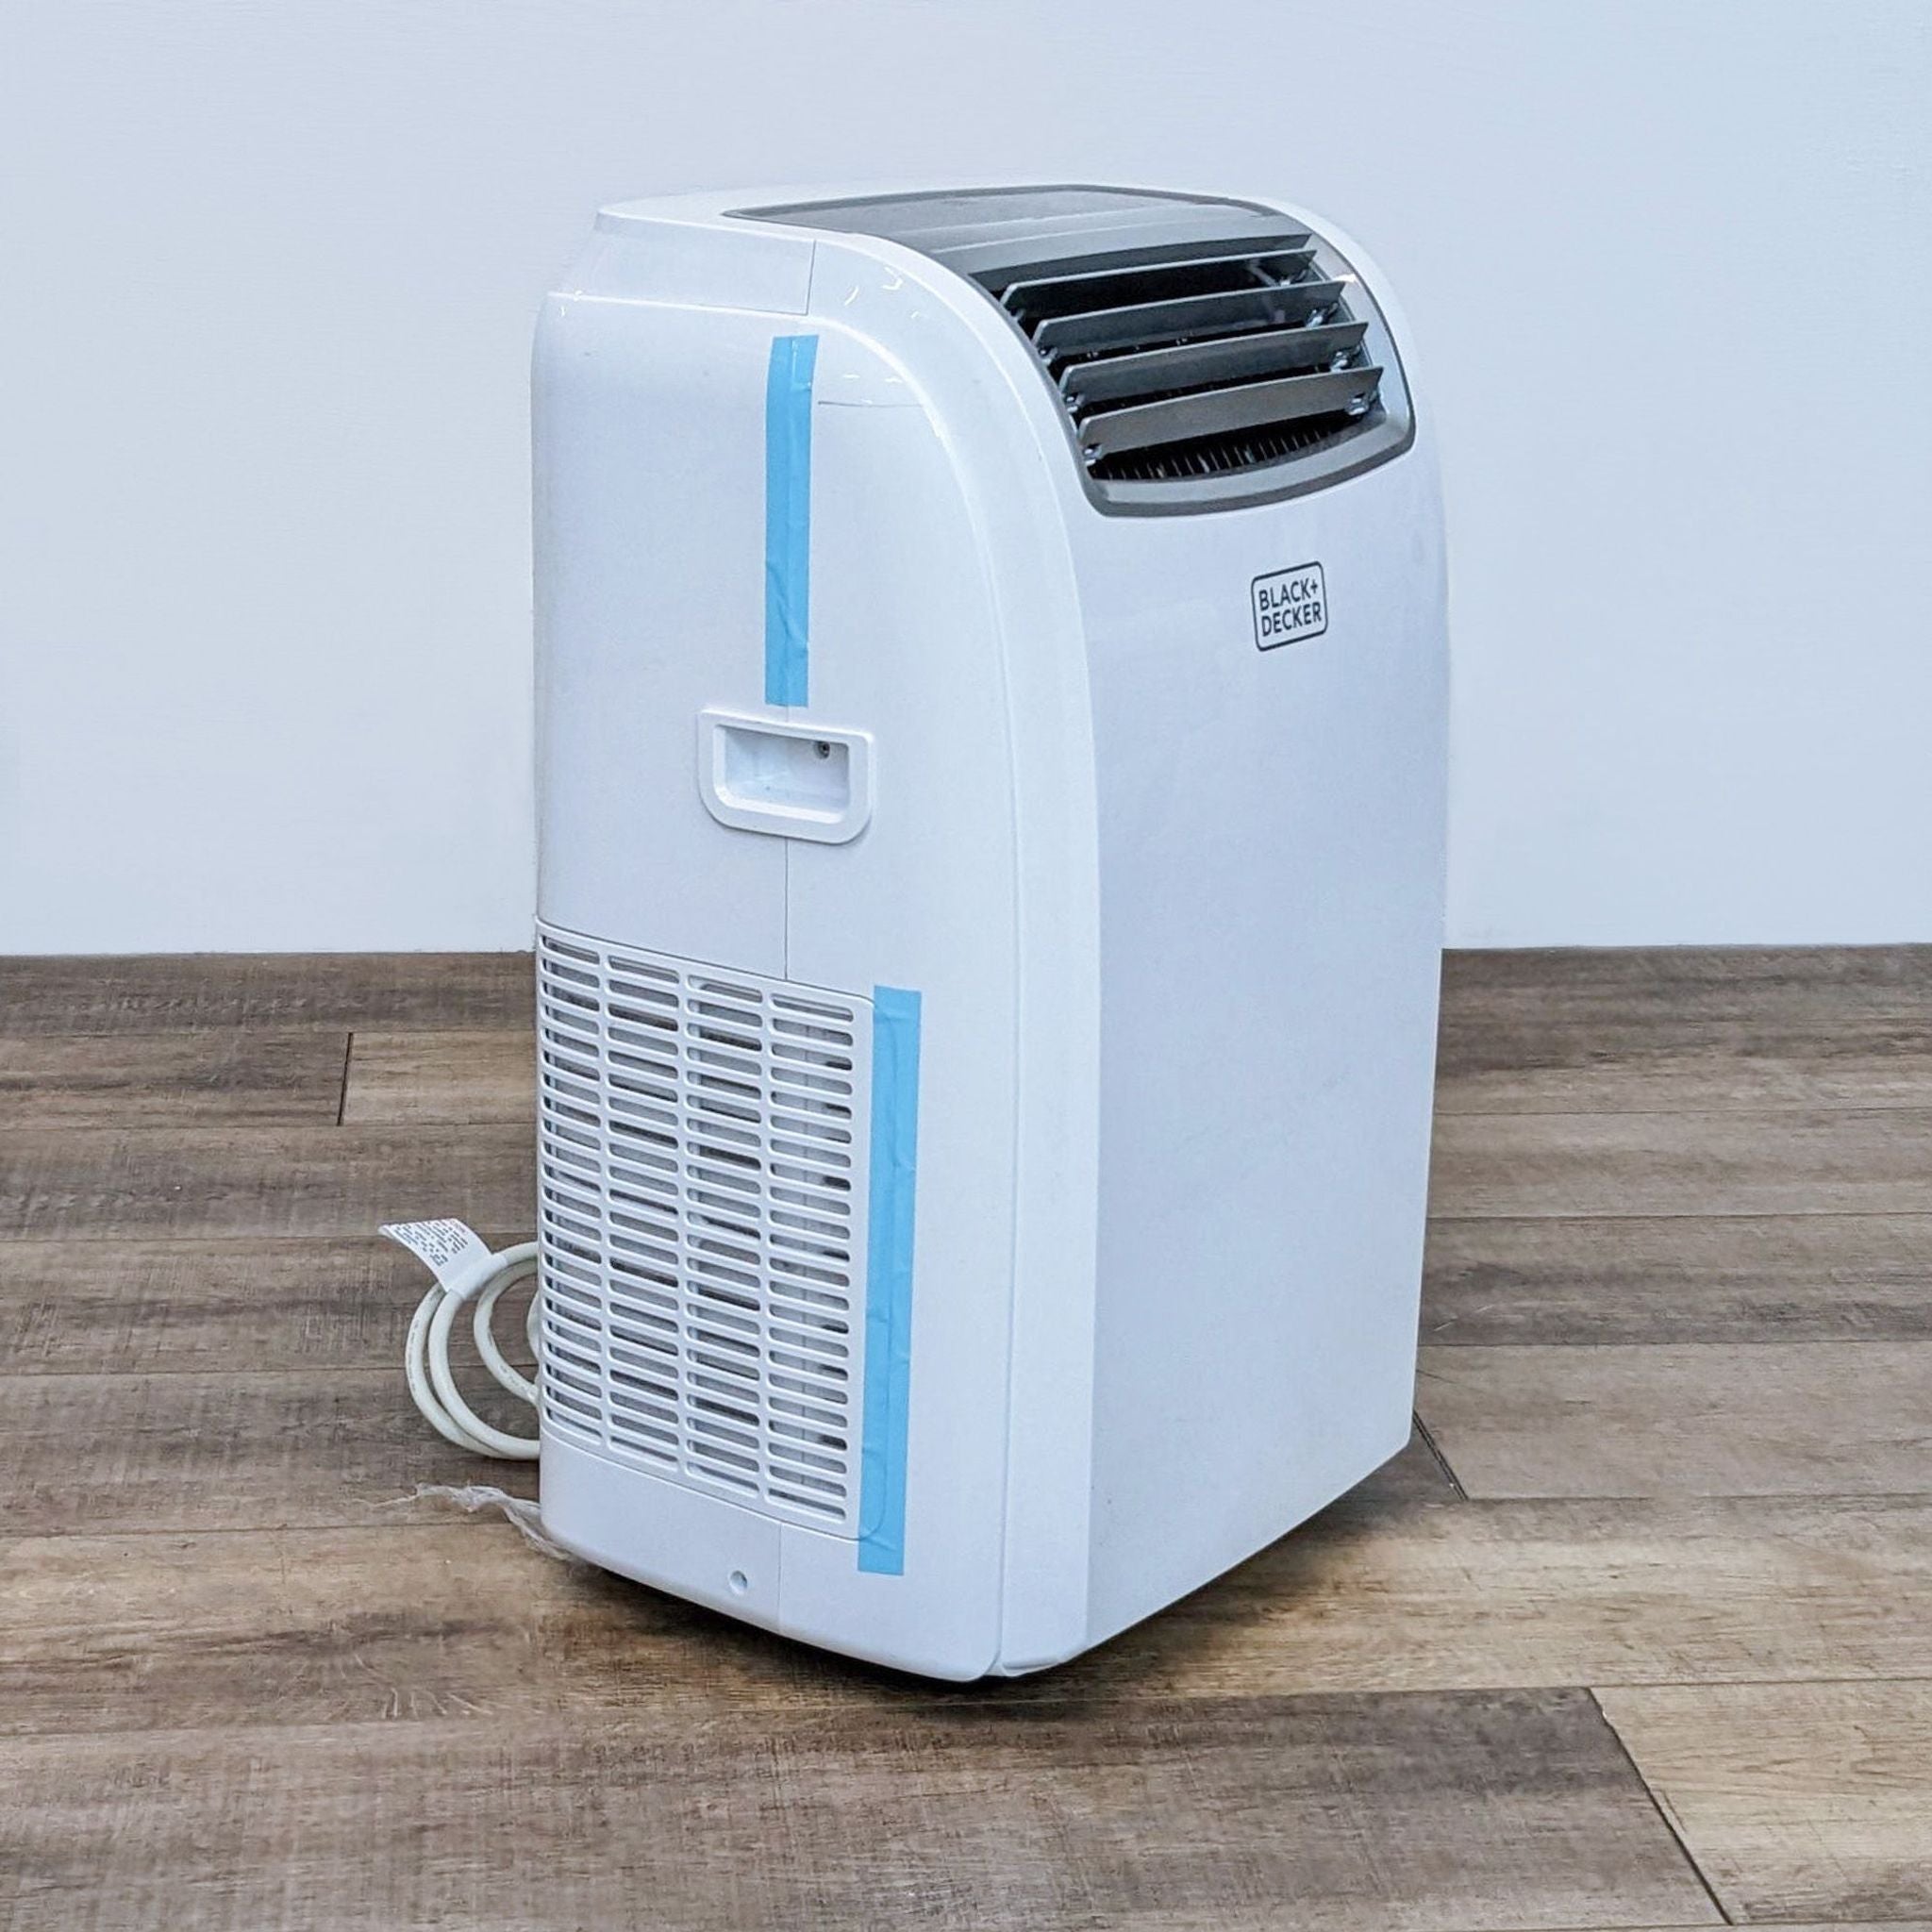 Image 2: Side angle of a Black + Decker portable air conditioner, showing vent and power cord on a wood-patterned floor.